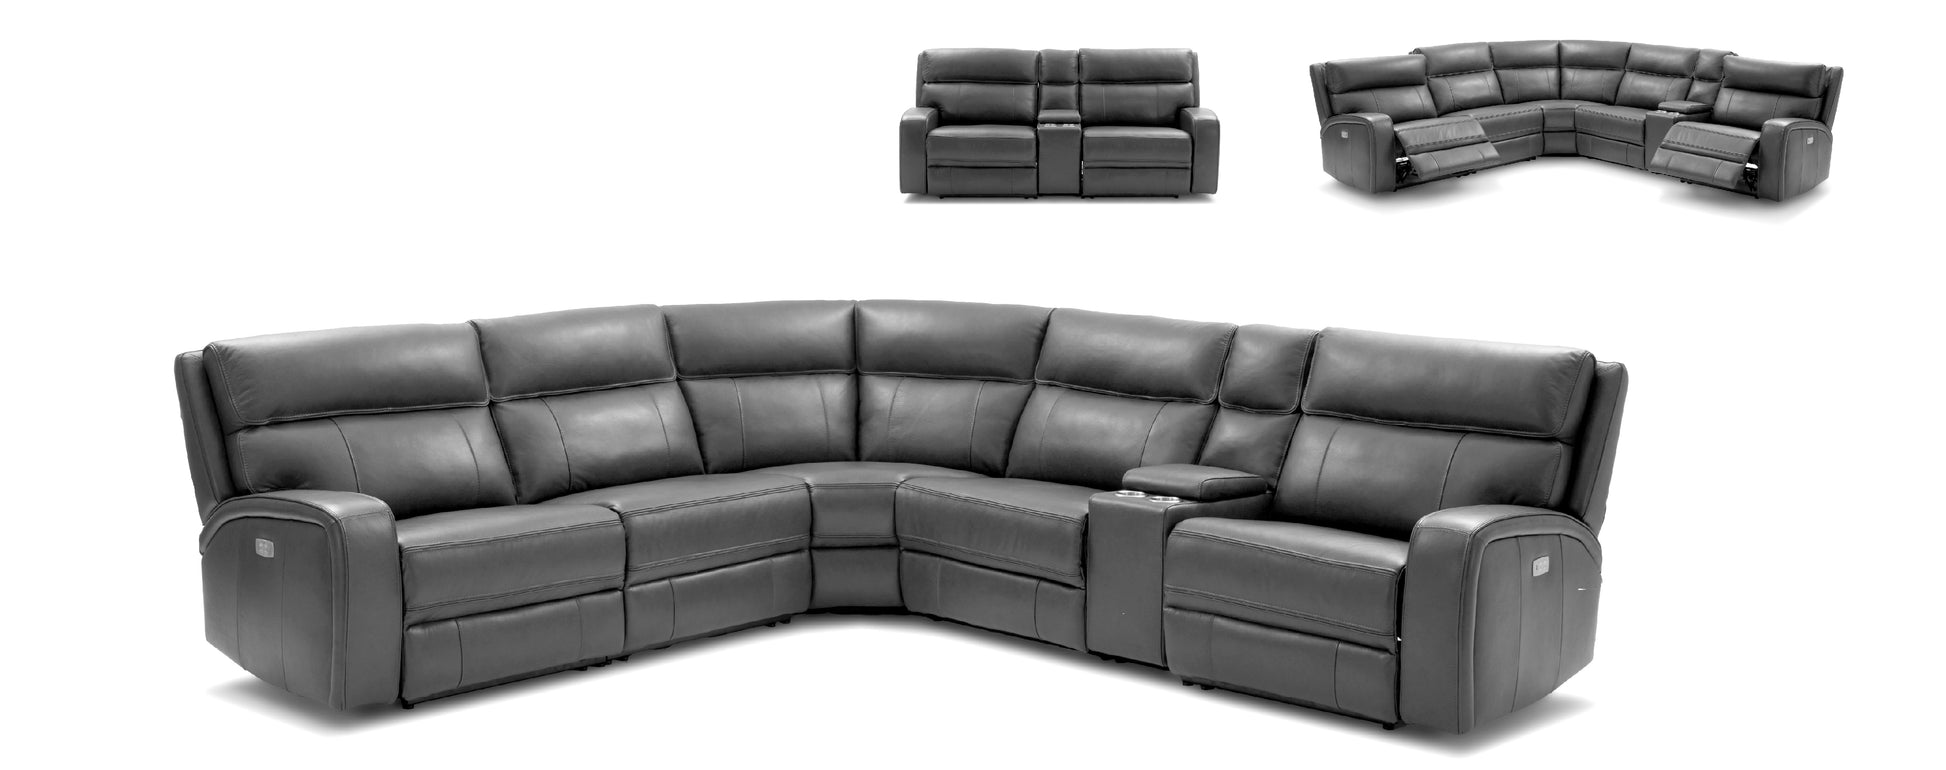 Cozy Motion Sectional Sofa Grey by JM